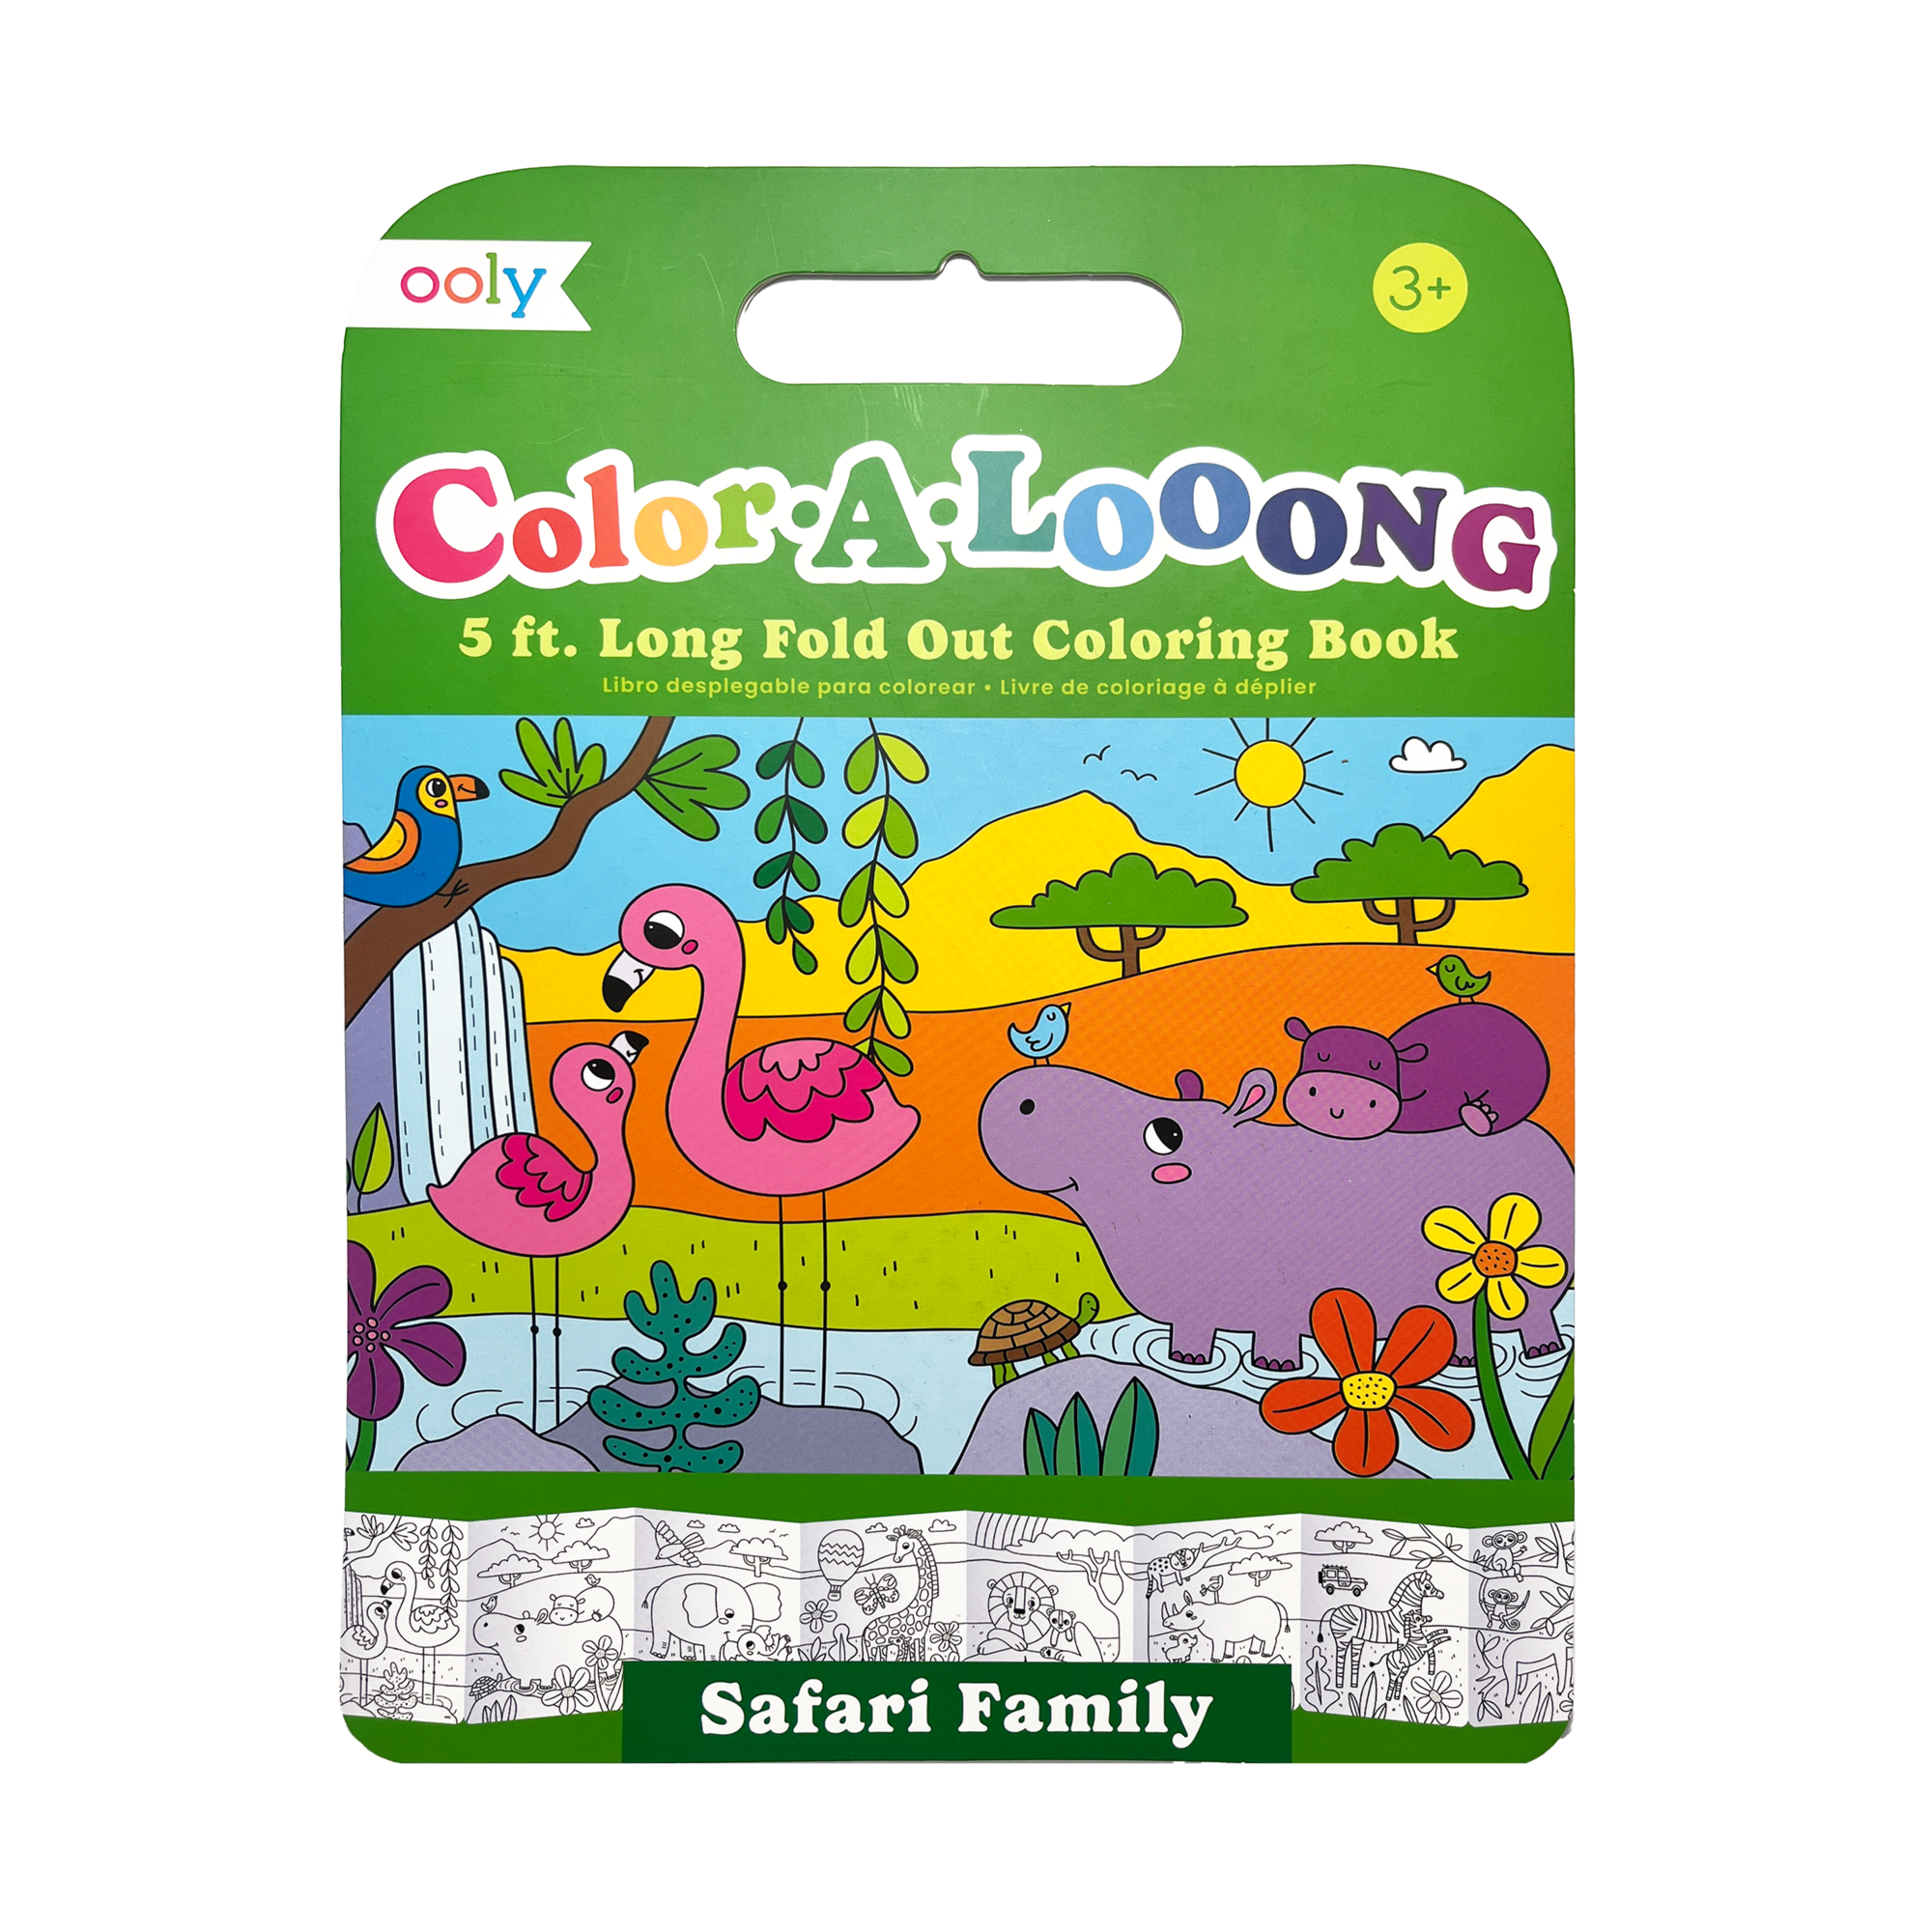 OOLY Color-A-Looong 5' Fold Out Kids Coloring Book - Safari Family front cover